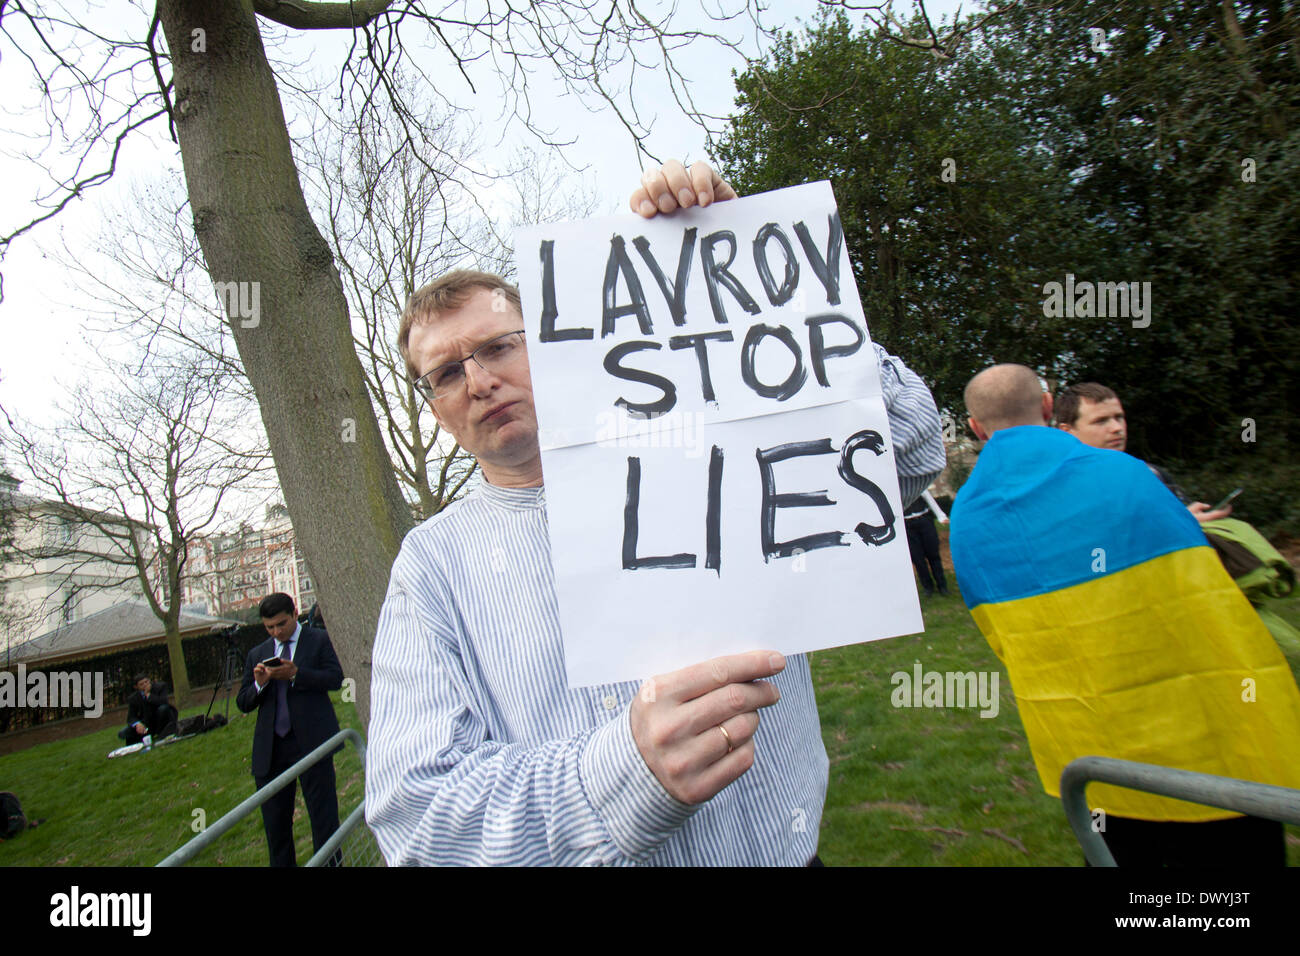 London UK. 14th March 2014. Ukranian protesters outside the American Ambassador residence in London against the visit of  Russian foreign minister Sergei Lavrov who was meeting US Secretary of State John Kerry  to discuss the Ukranian crisis and the referendum in Crimea which ended in a stalemate Stock Photo